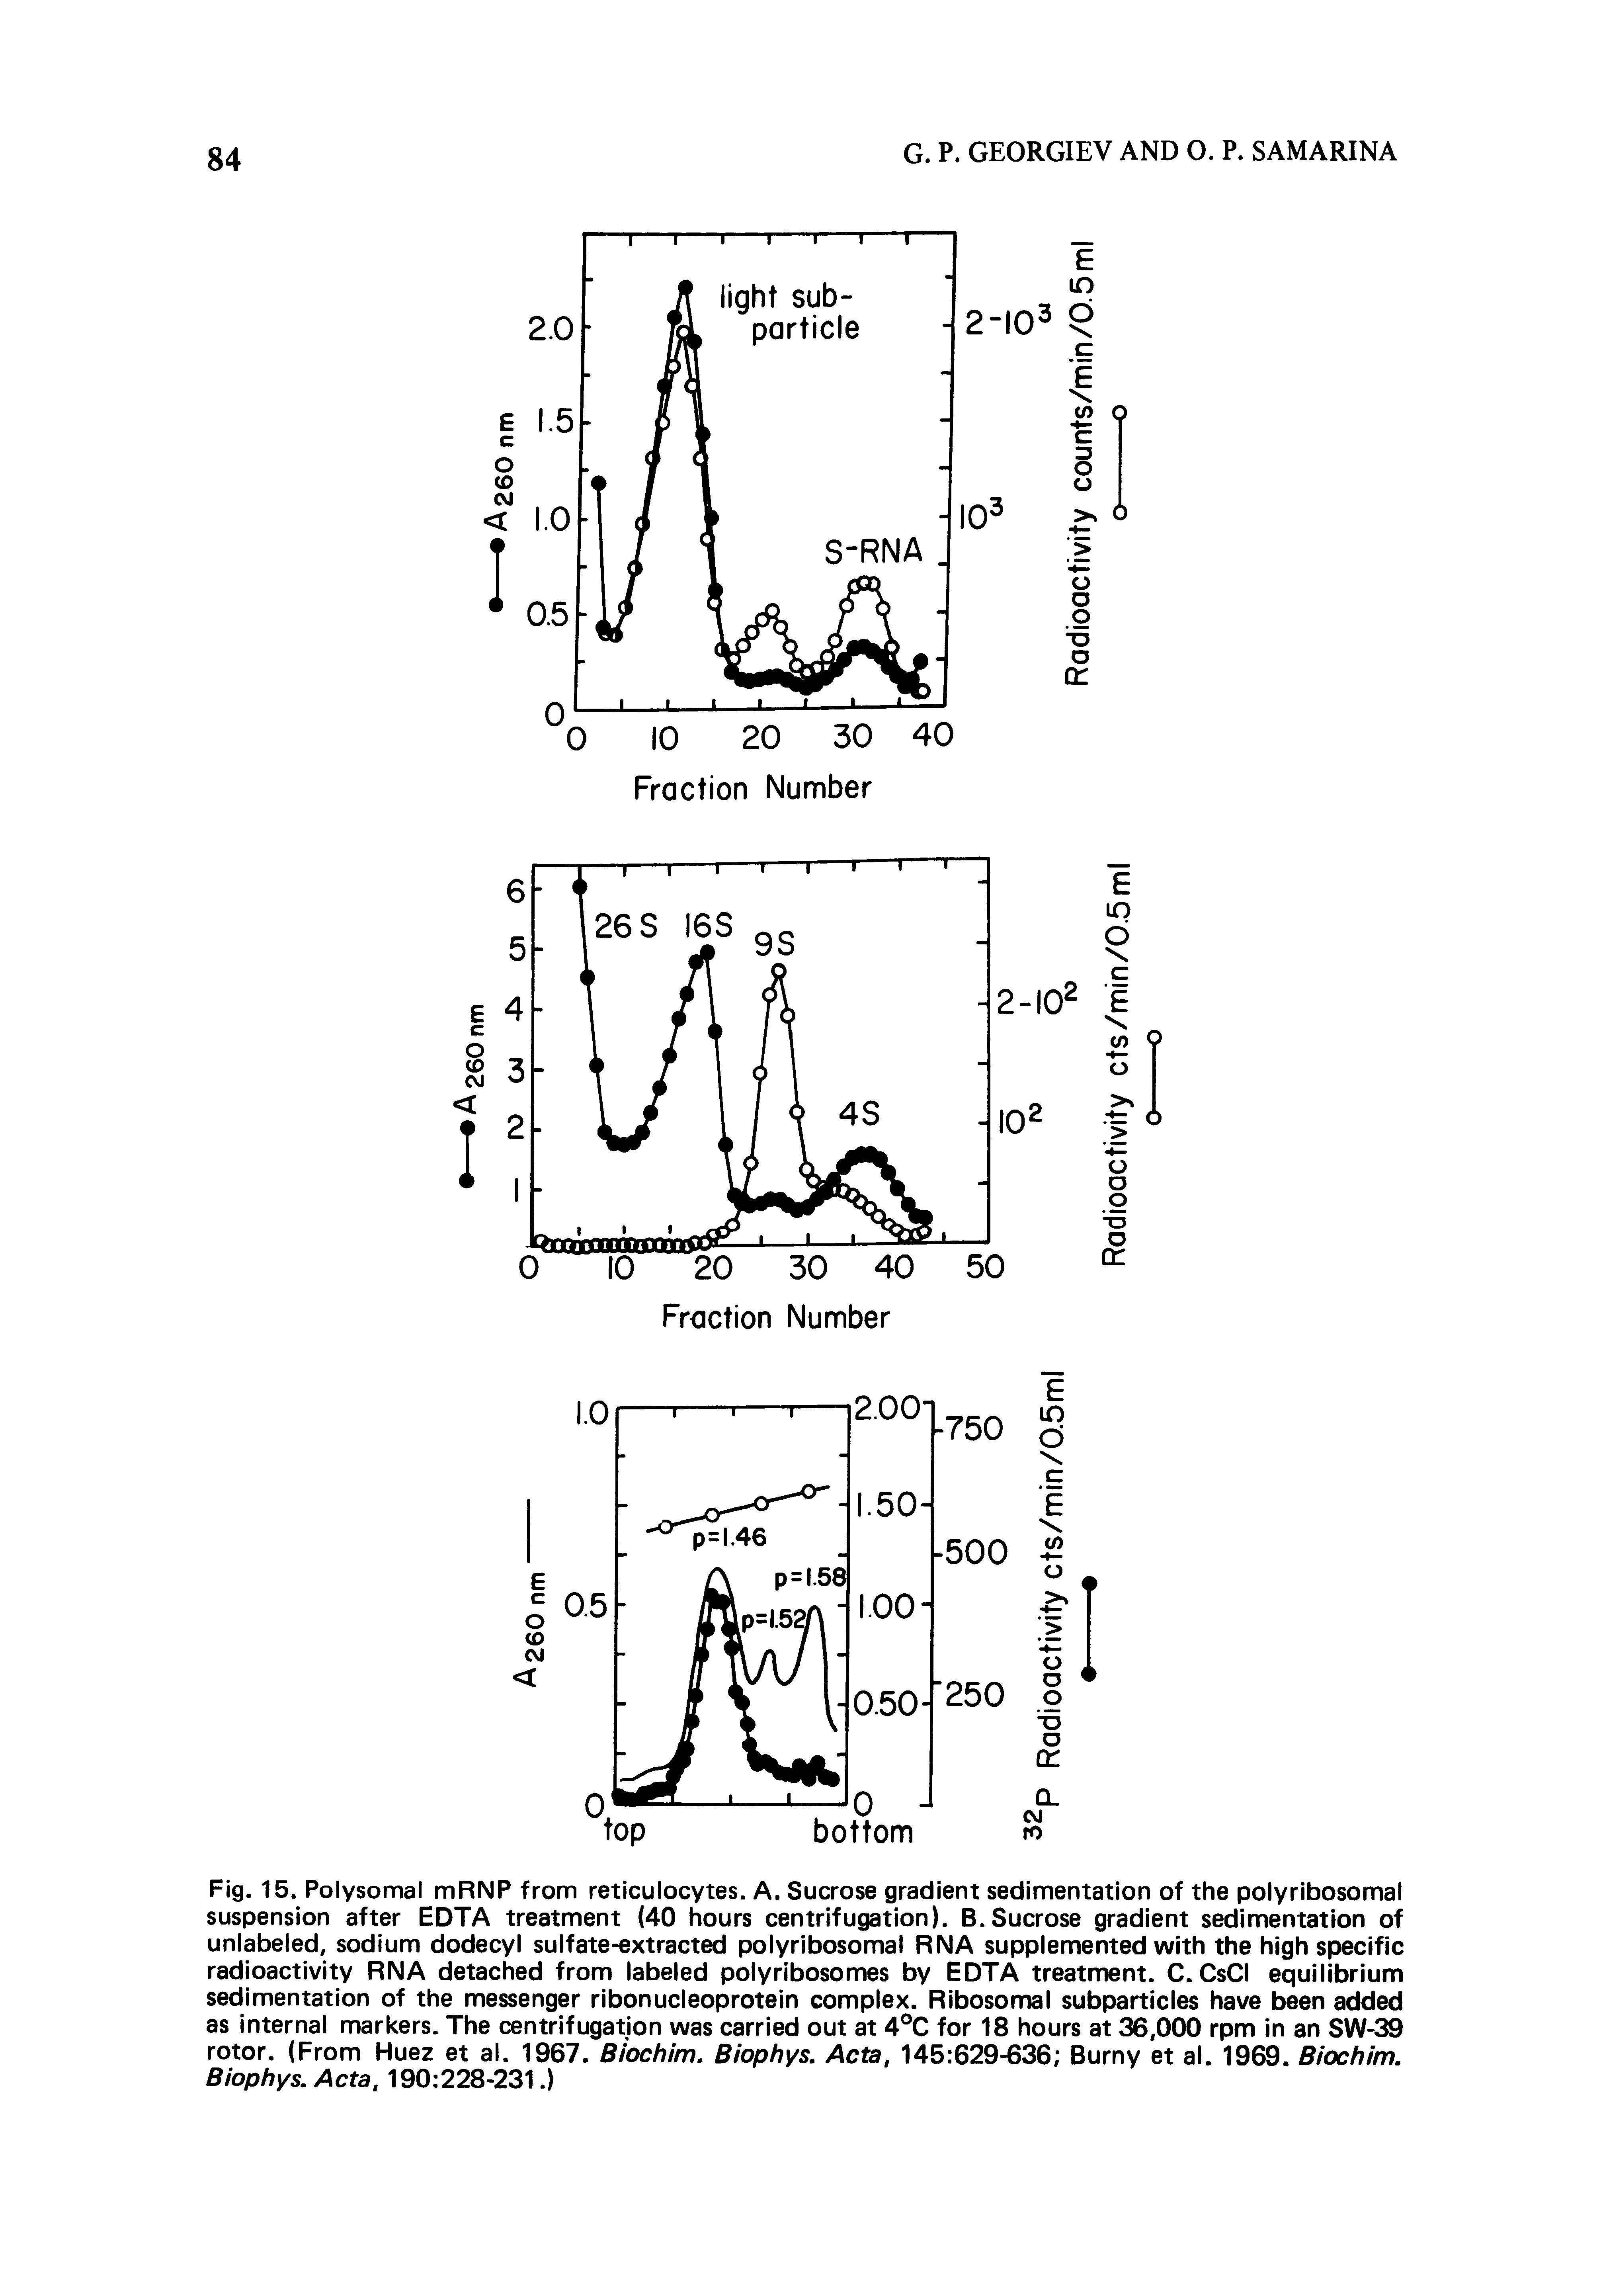 Fig. 15. Polysomal mRNP from reticulocytes. A. Sucrose gradient sedimentation of the polyribosomal suspension after EDTA treatment (40 hours centrifugation). B.Sucrose gradient sedimentation of unlabeled, sodium dodecyl sulfate-extracted polyribosomal RNA supplemented with the high specific radioactivity RNA detached from labeled polyribosomes by EDTA treatment. C. CsCi equilibrium sedimentation of the messenger ribonucleoprotein complex. Ribosomal subparticles have been added as Internal markers. The centrifugation was carried out at 4°C for 18 hours at 36,000 rpm in an SW-39 rotor. (From Huez et al. 1967. Biochim. Biophys. Acta, 145 629-636 Burny et al. 1969. Biochim, Biophys. Acta, 190 228-231.)...